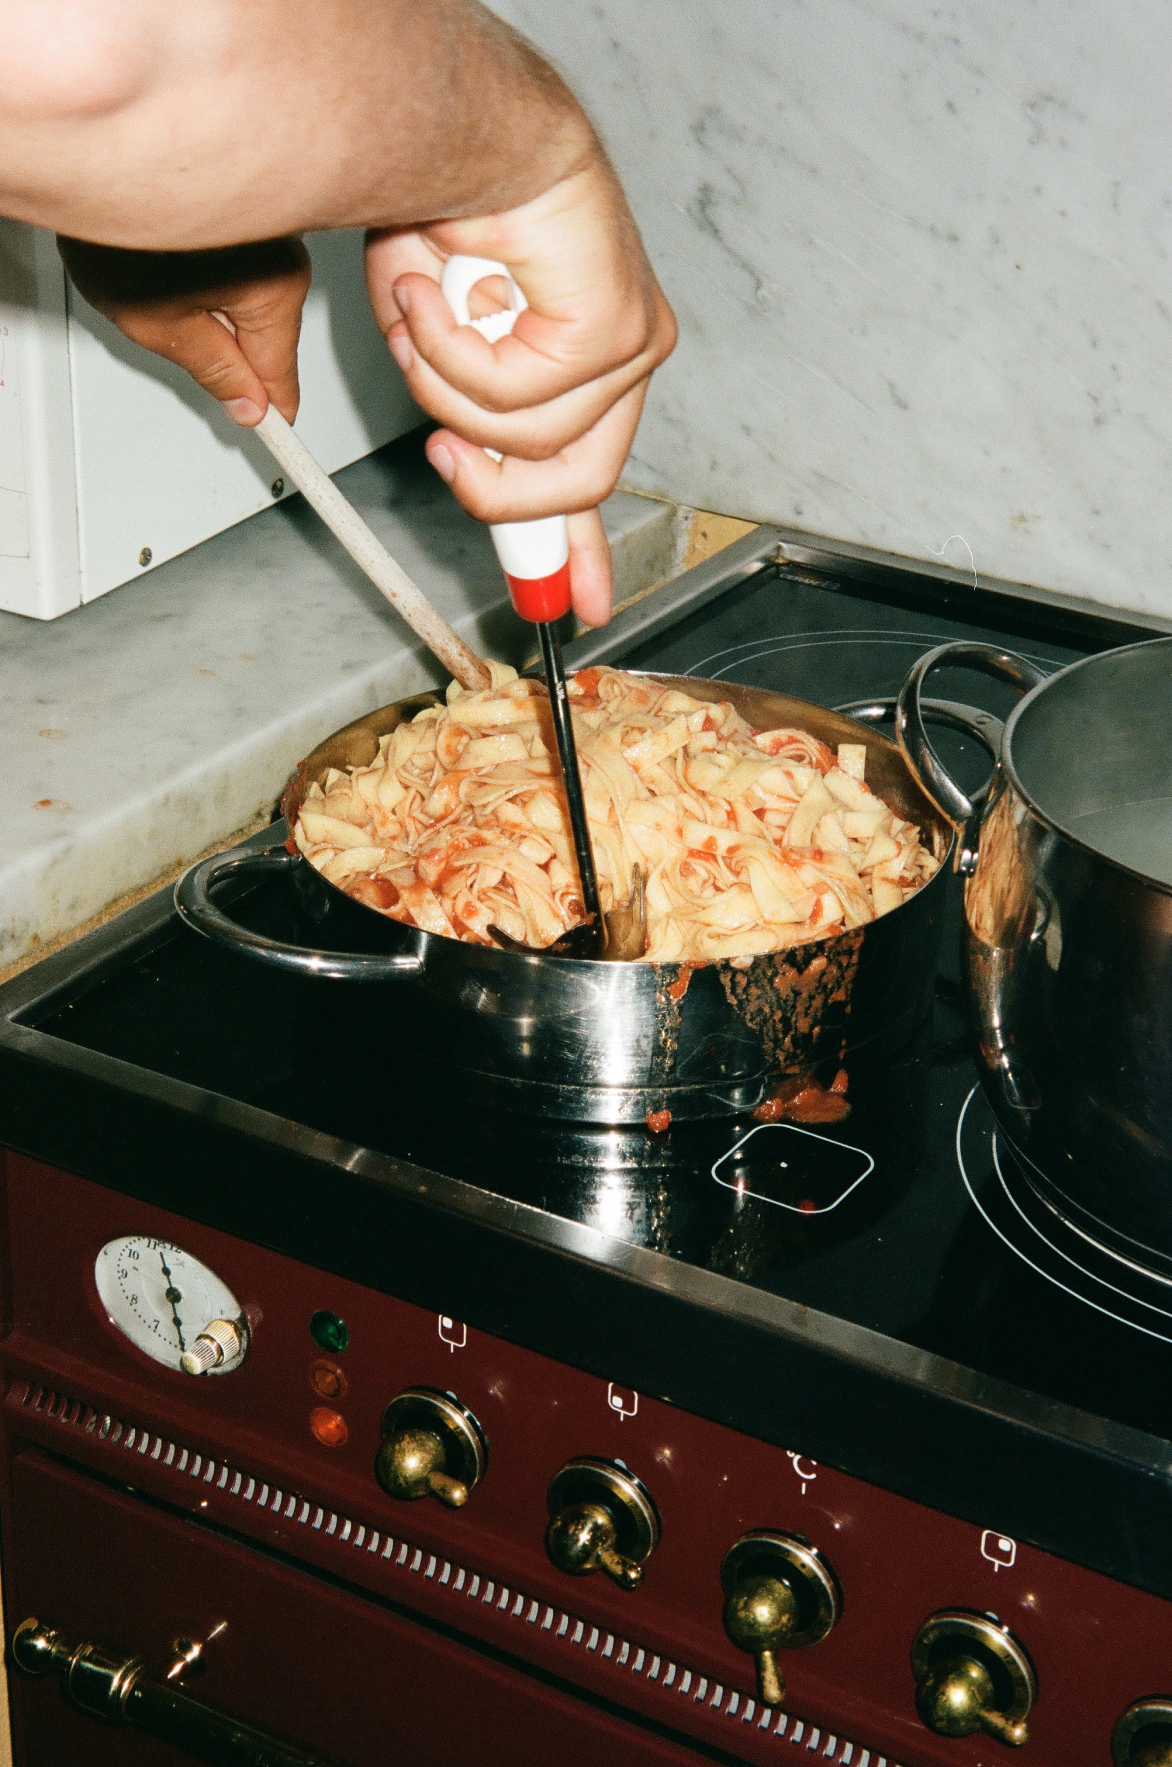 We spend several nights cooking up pasta and other italian dishes in our small little kitchen